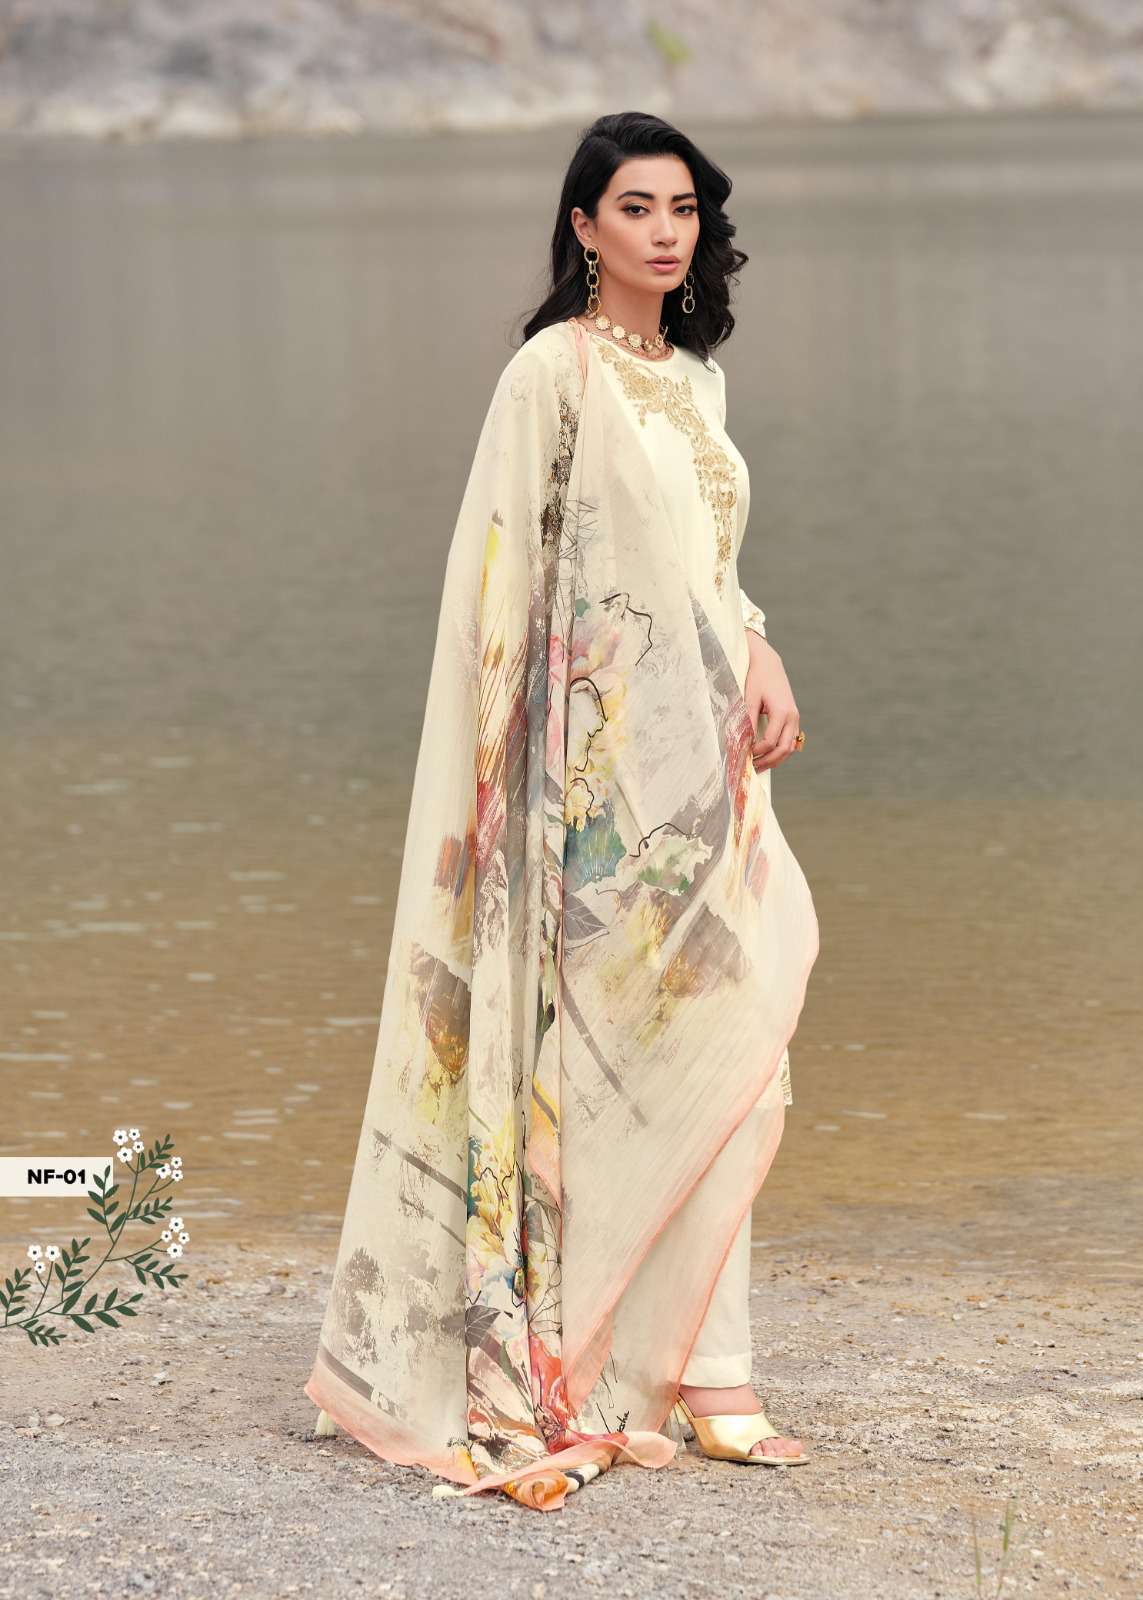 Varsha Nafees NF04 - Viscose Muslin Woven With Embroidery Suit